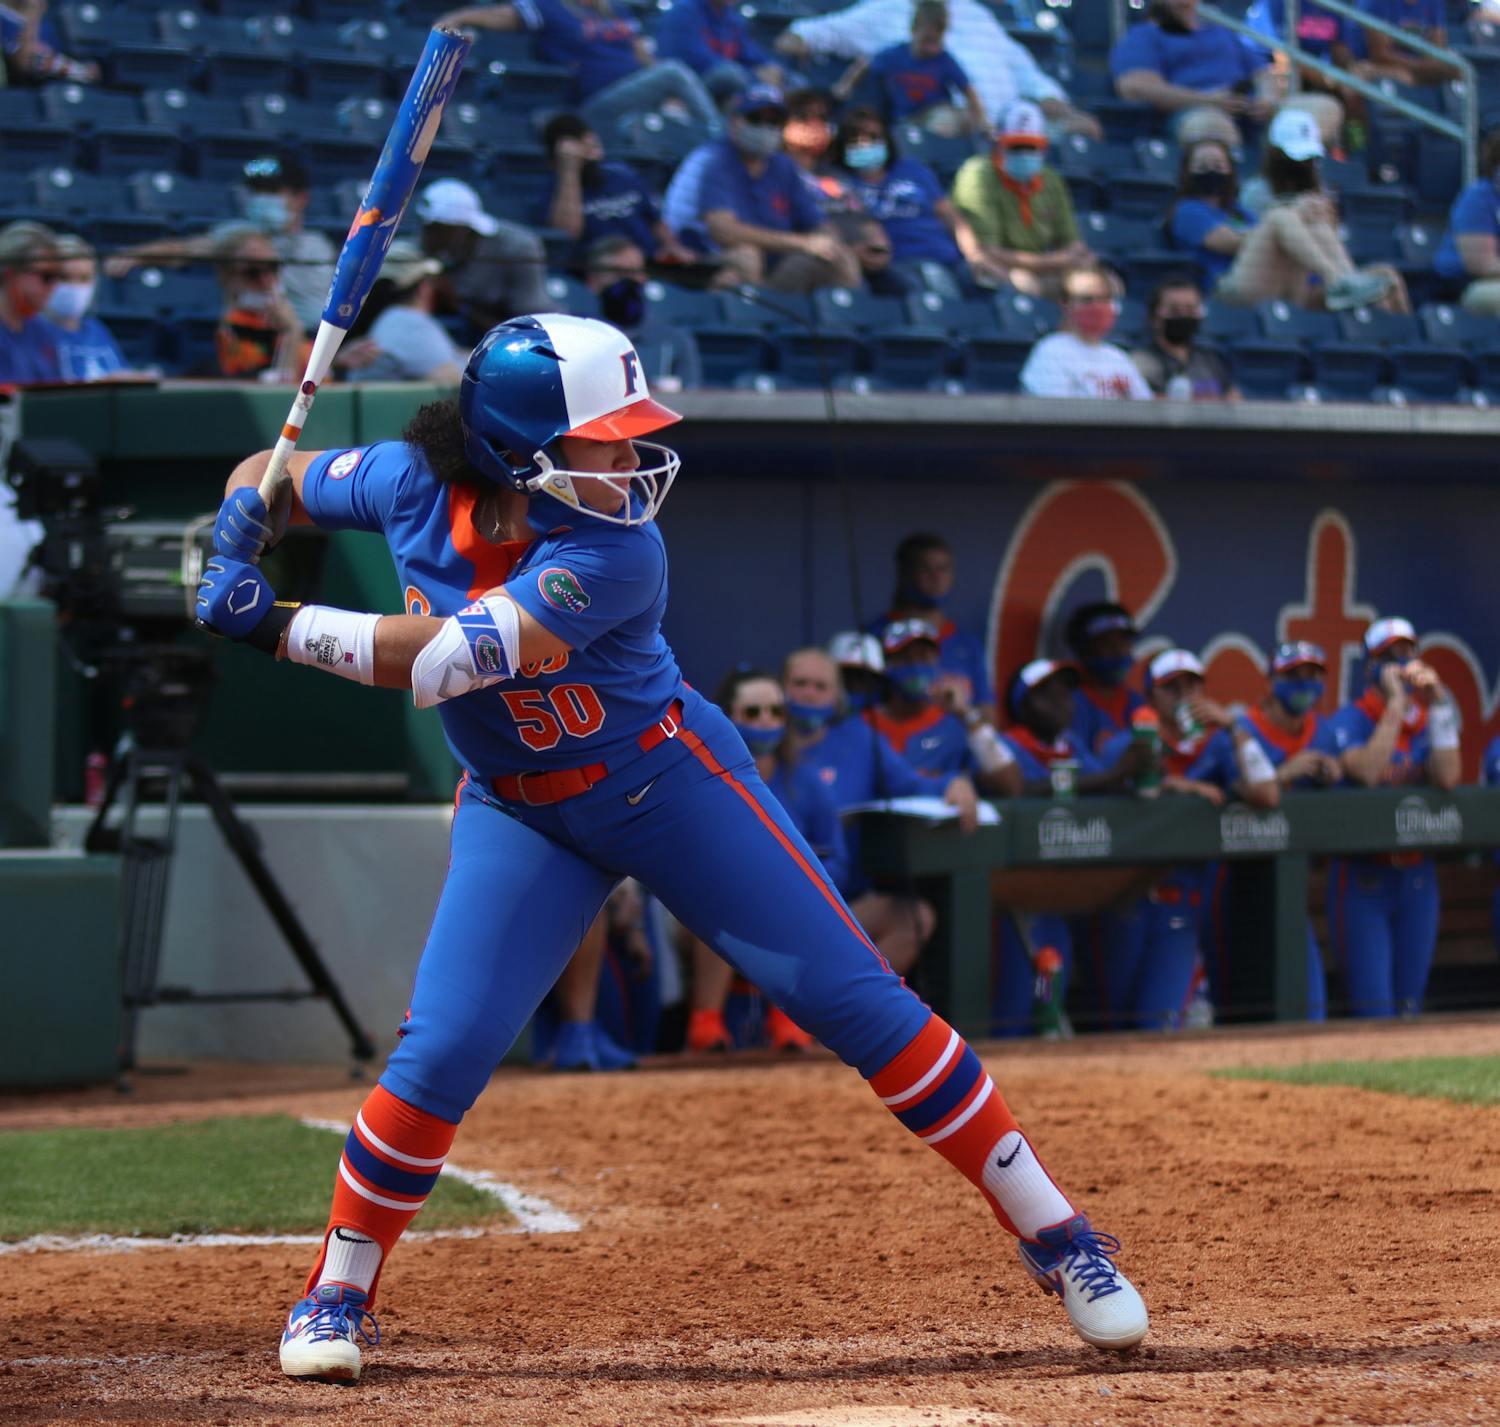 Florida’s 5-2 win over FSU marked its last game before the cancellation of the 2020 season due to the ongoing COVID-19 pandemic. 
Photo from UF-Louisville game Feb. 27.